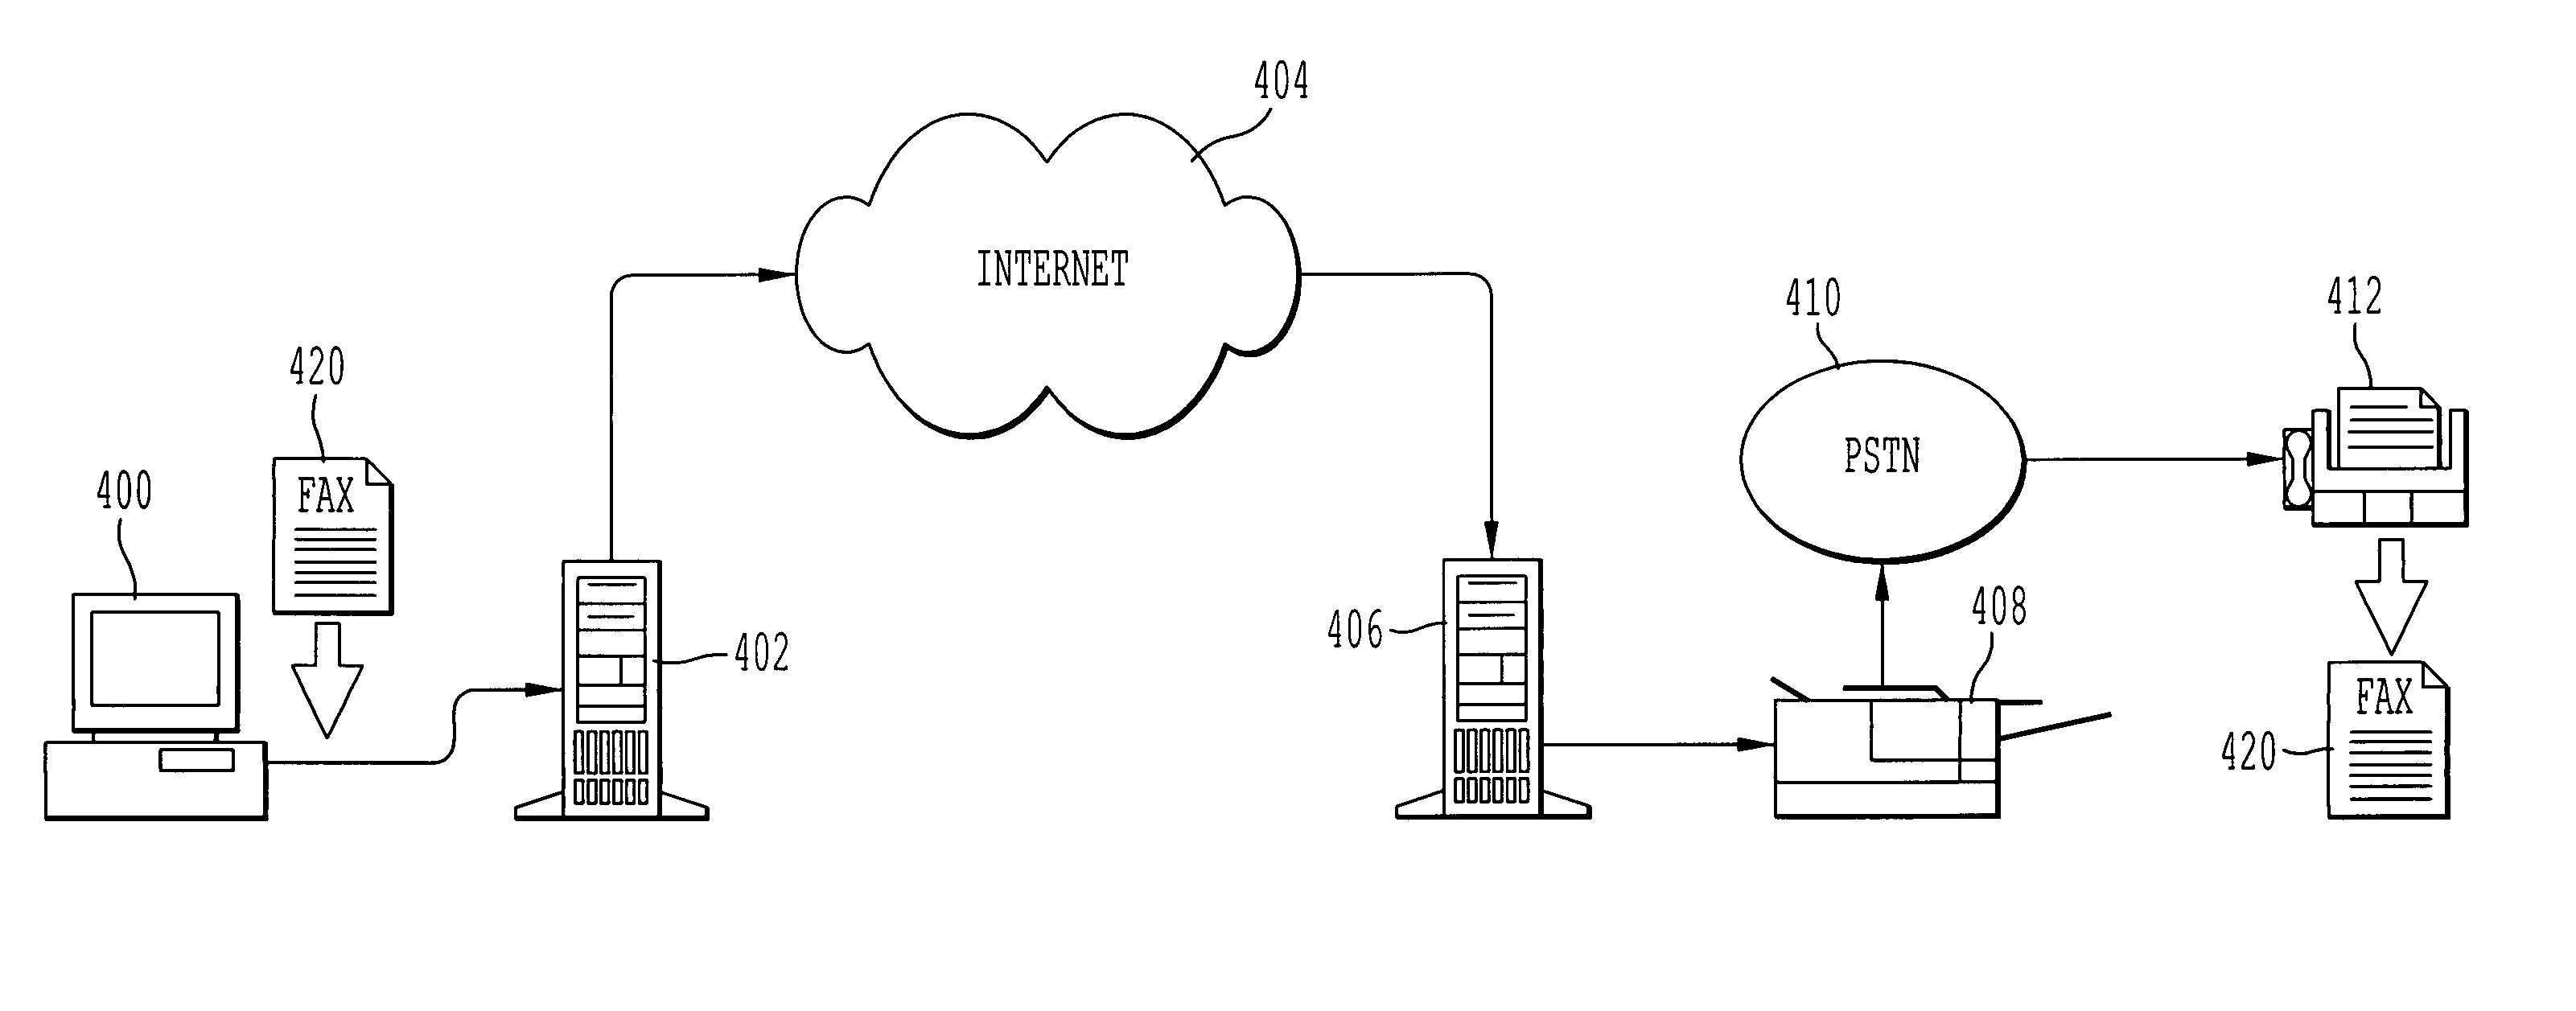 Method and system for transmitting a facsimile from a computer to a remote fax machine using an internet fax machine as transfer station